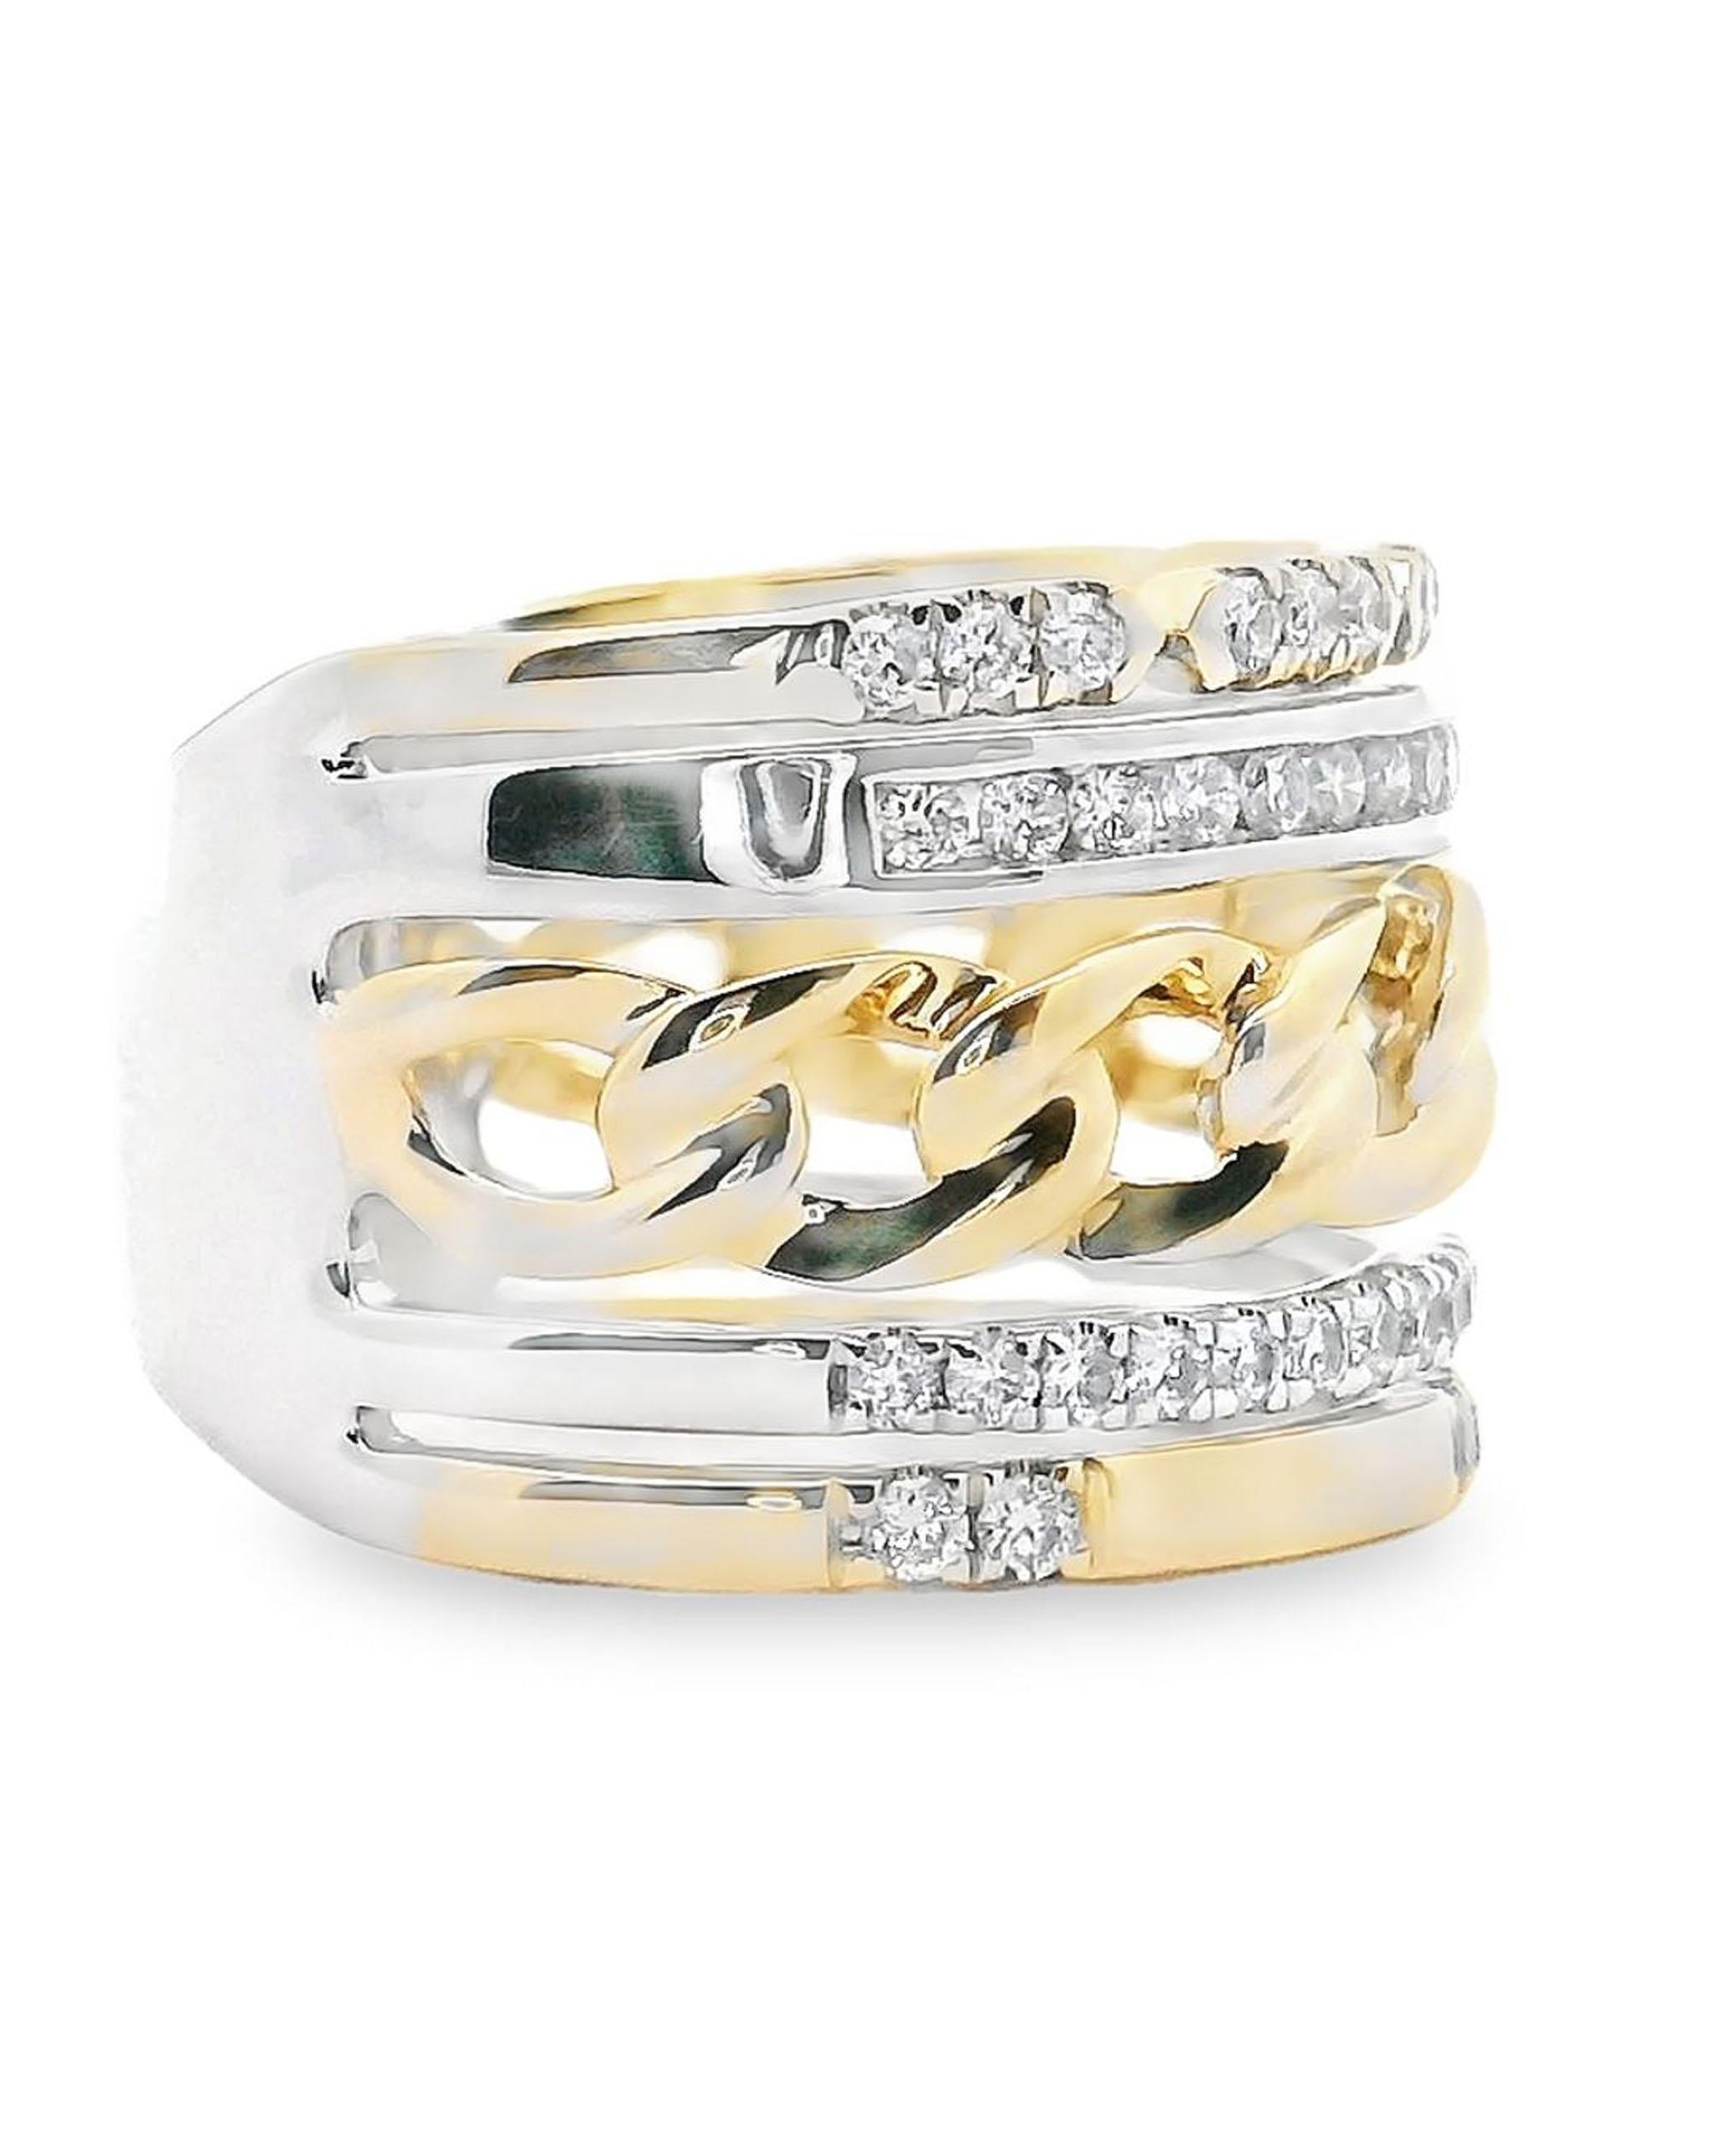 14K two tone multi band wide ring with chain detail and round faceted diamonds weighing 0.61 carats total.

* Finger size 6
* Top width 13.75mm and tapers down to 7.75mm
* Diamonds are H color, SI1 clarity